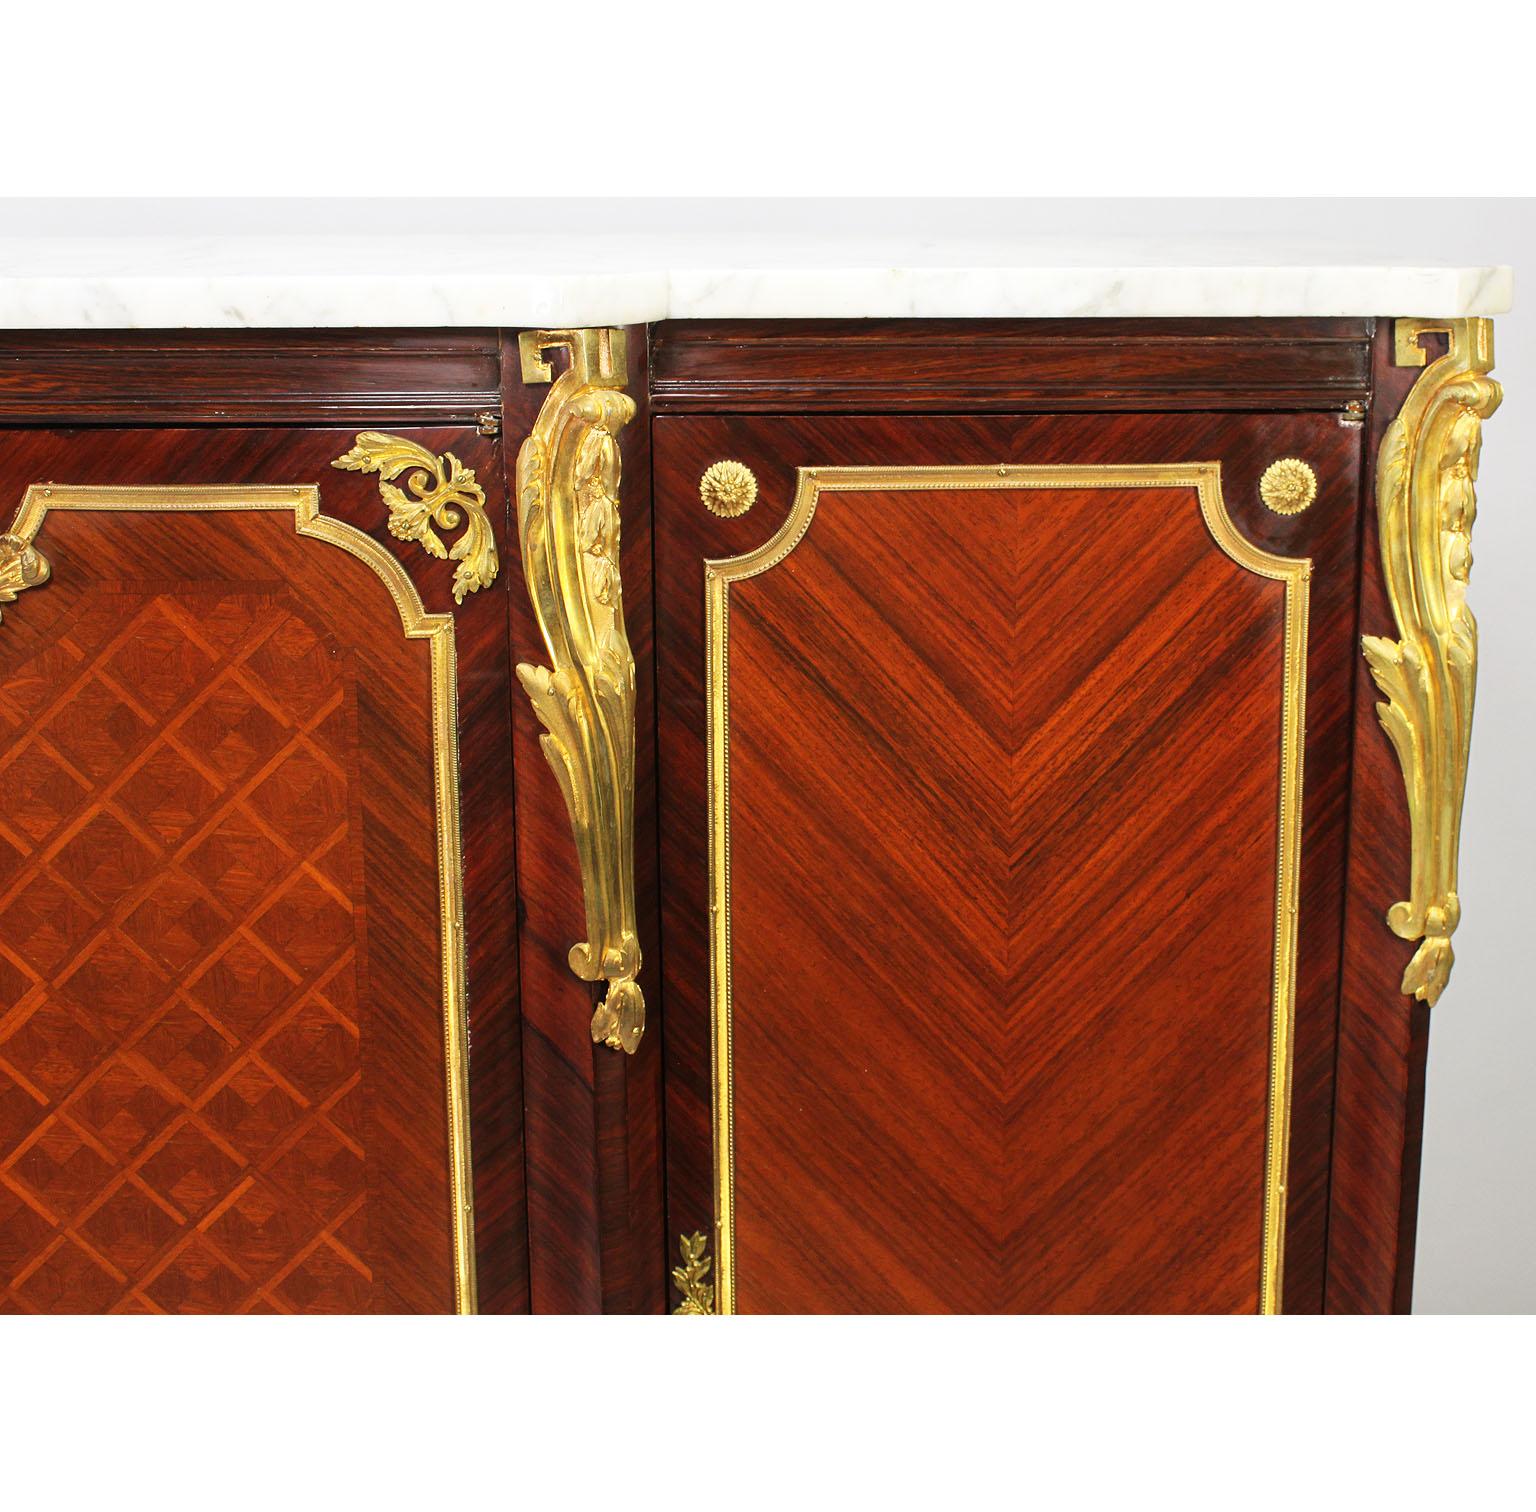 Early 20th Century French 19th-20th Century Louis XV Style Tulipwood & Gilt-Bronze Mounted Cabinet For Sale